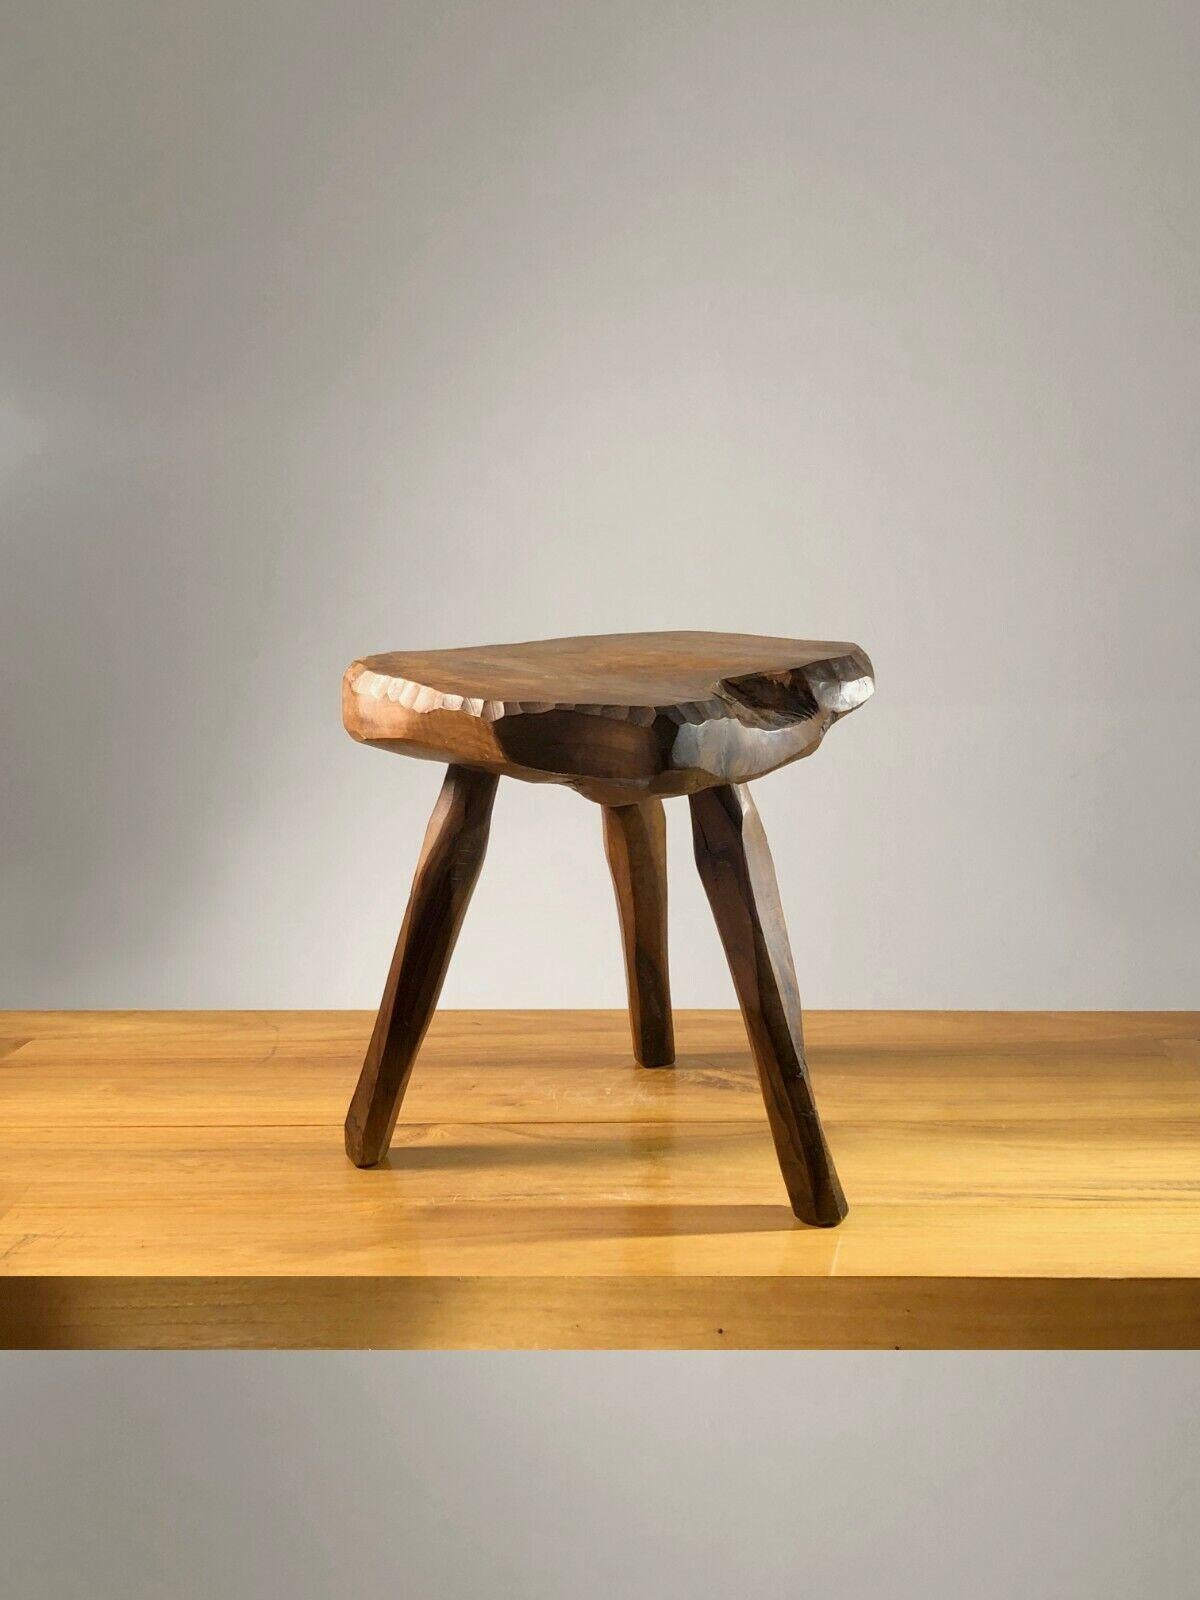 A magnificent and sculptural tripod stool, Modernist, Brutalist, Popular Art, in solid gouge-cut wood, in the spirit of Jean Touret & Les Artisans de Marolles, to be attributed, France 1950.

DIMENSIONS: 35 x 31.5 x 30 cm

CONDITION: In beautiful